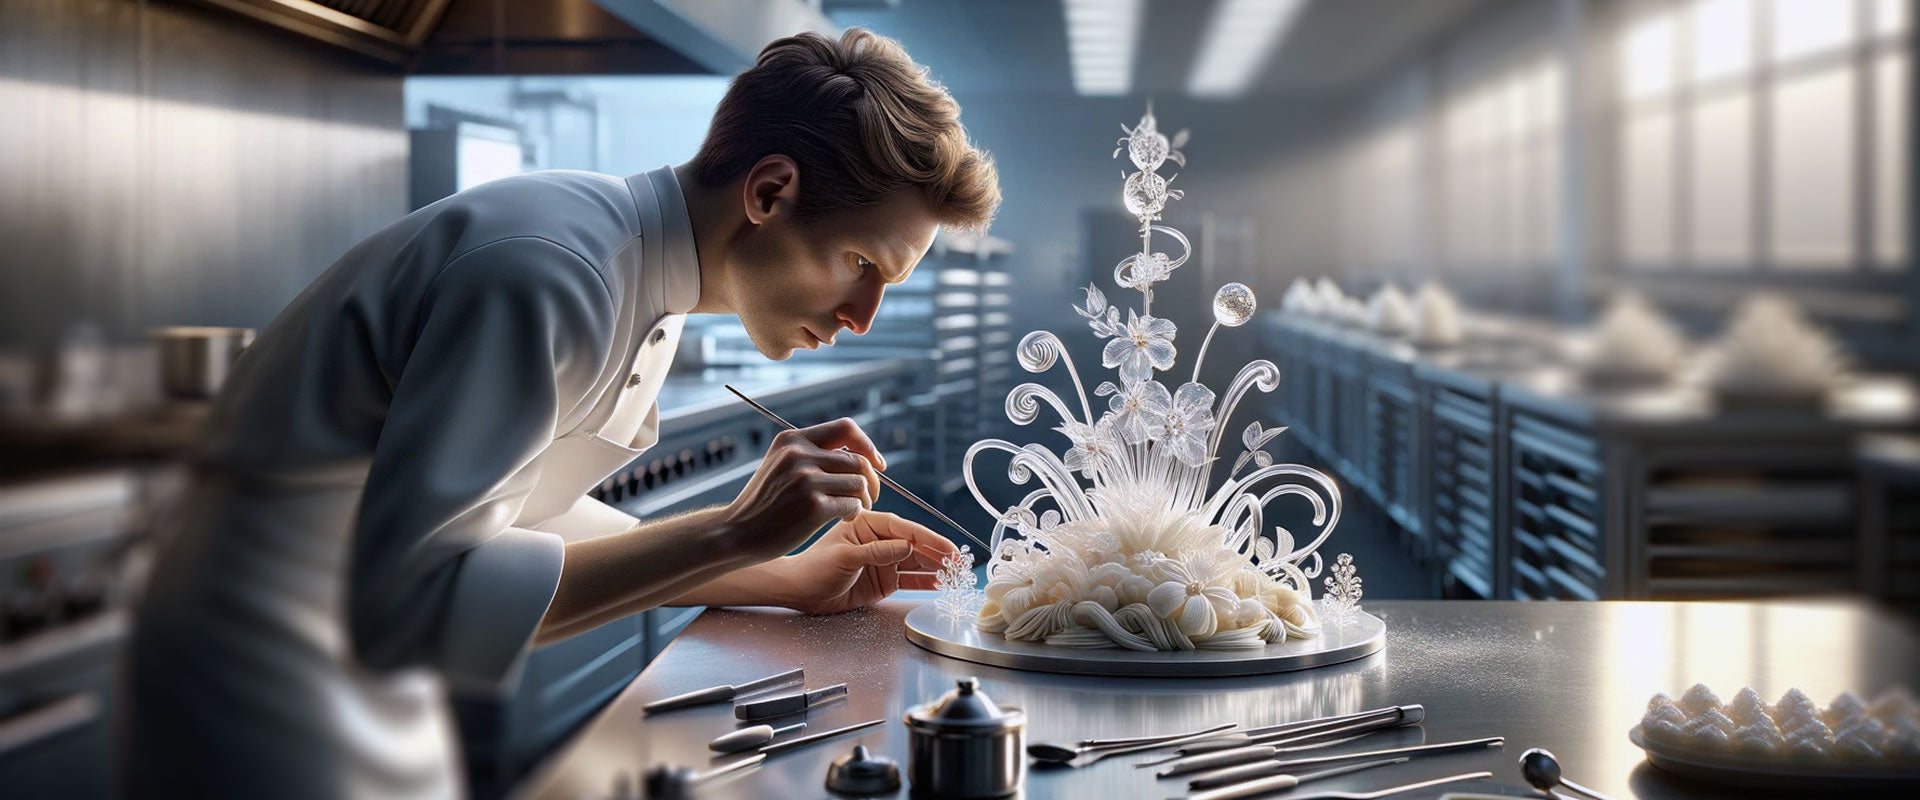 pastry chef working on sugar work edible decorations